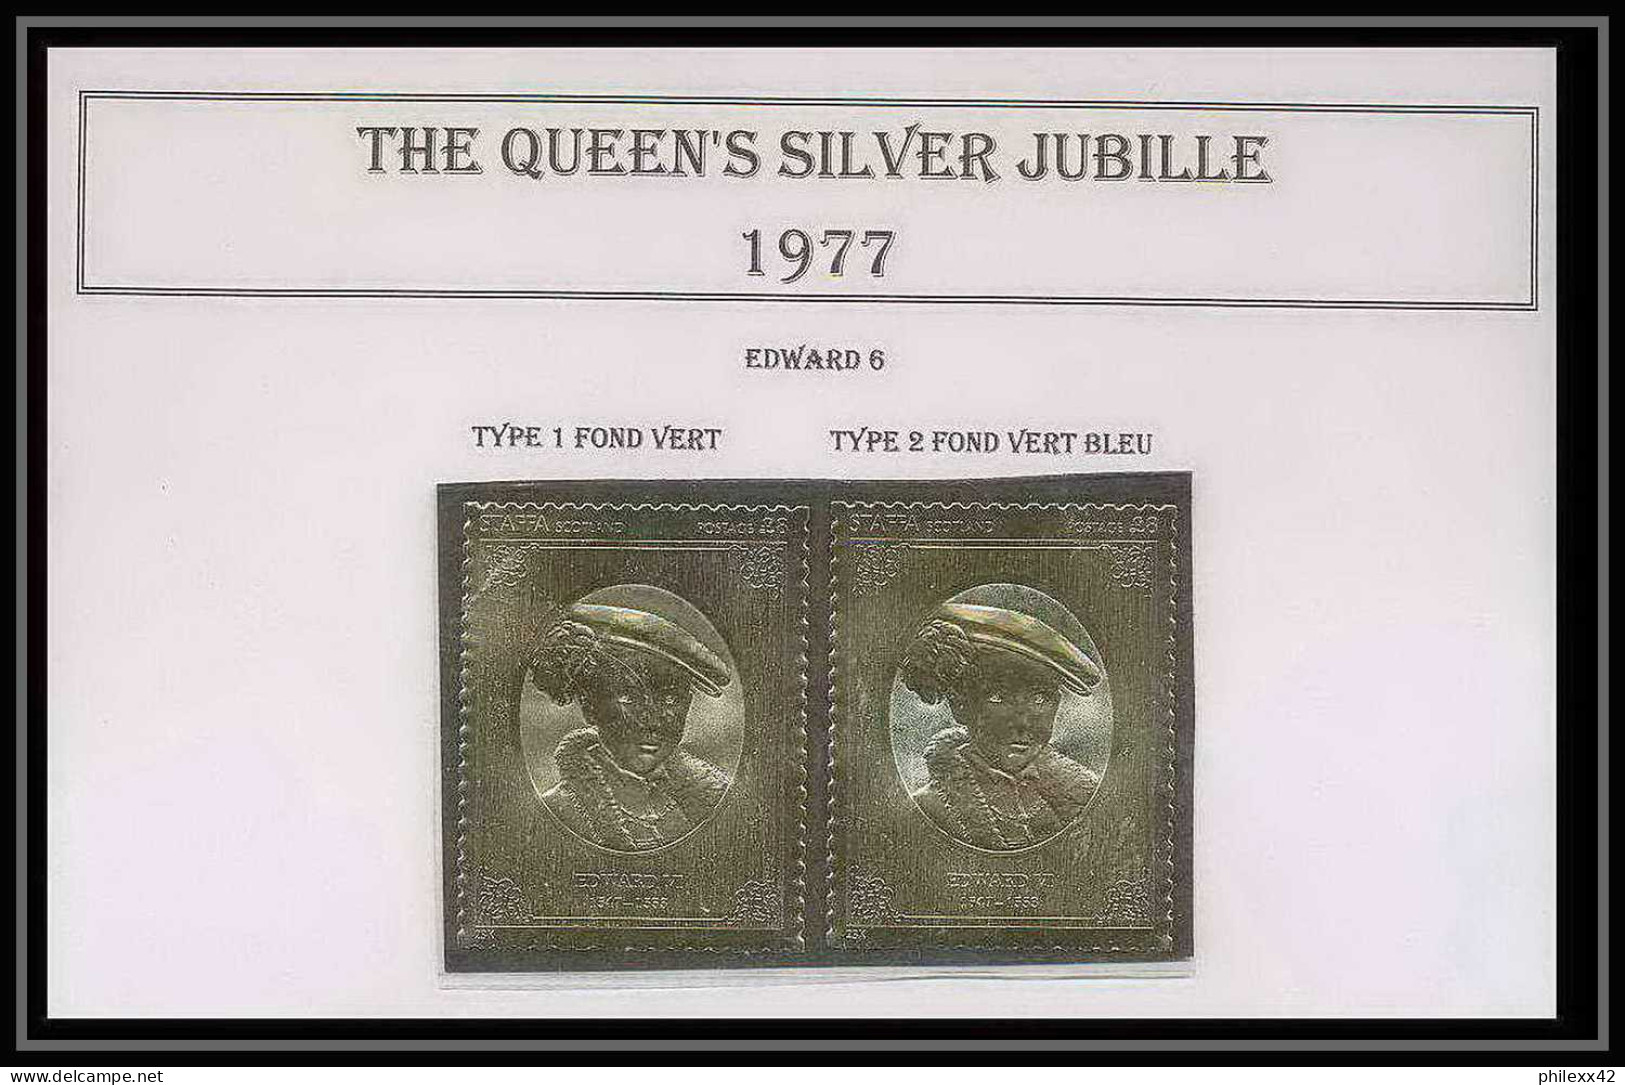 460 Staffa Scotland The Queen's Silver Jubilee 1977 OR Gold Stamps Monarchy United Kingdom Edward 6 Type 1&2 Neuf** Mnh - Scotland